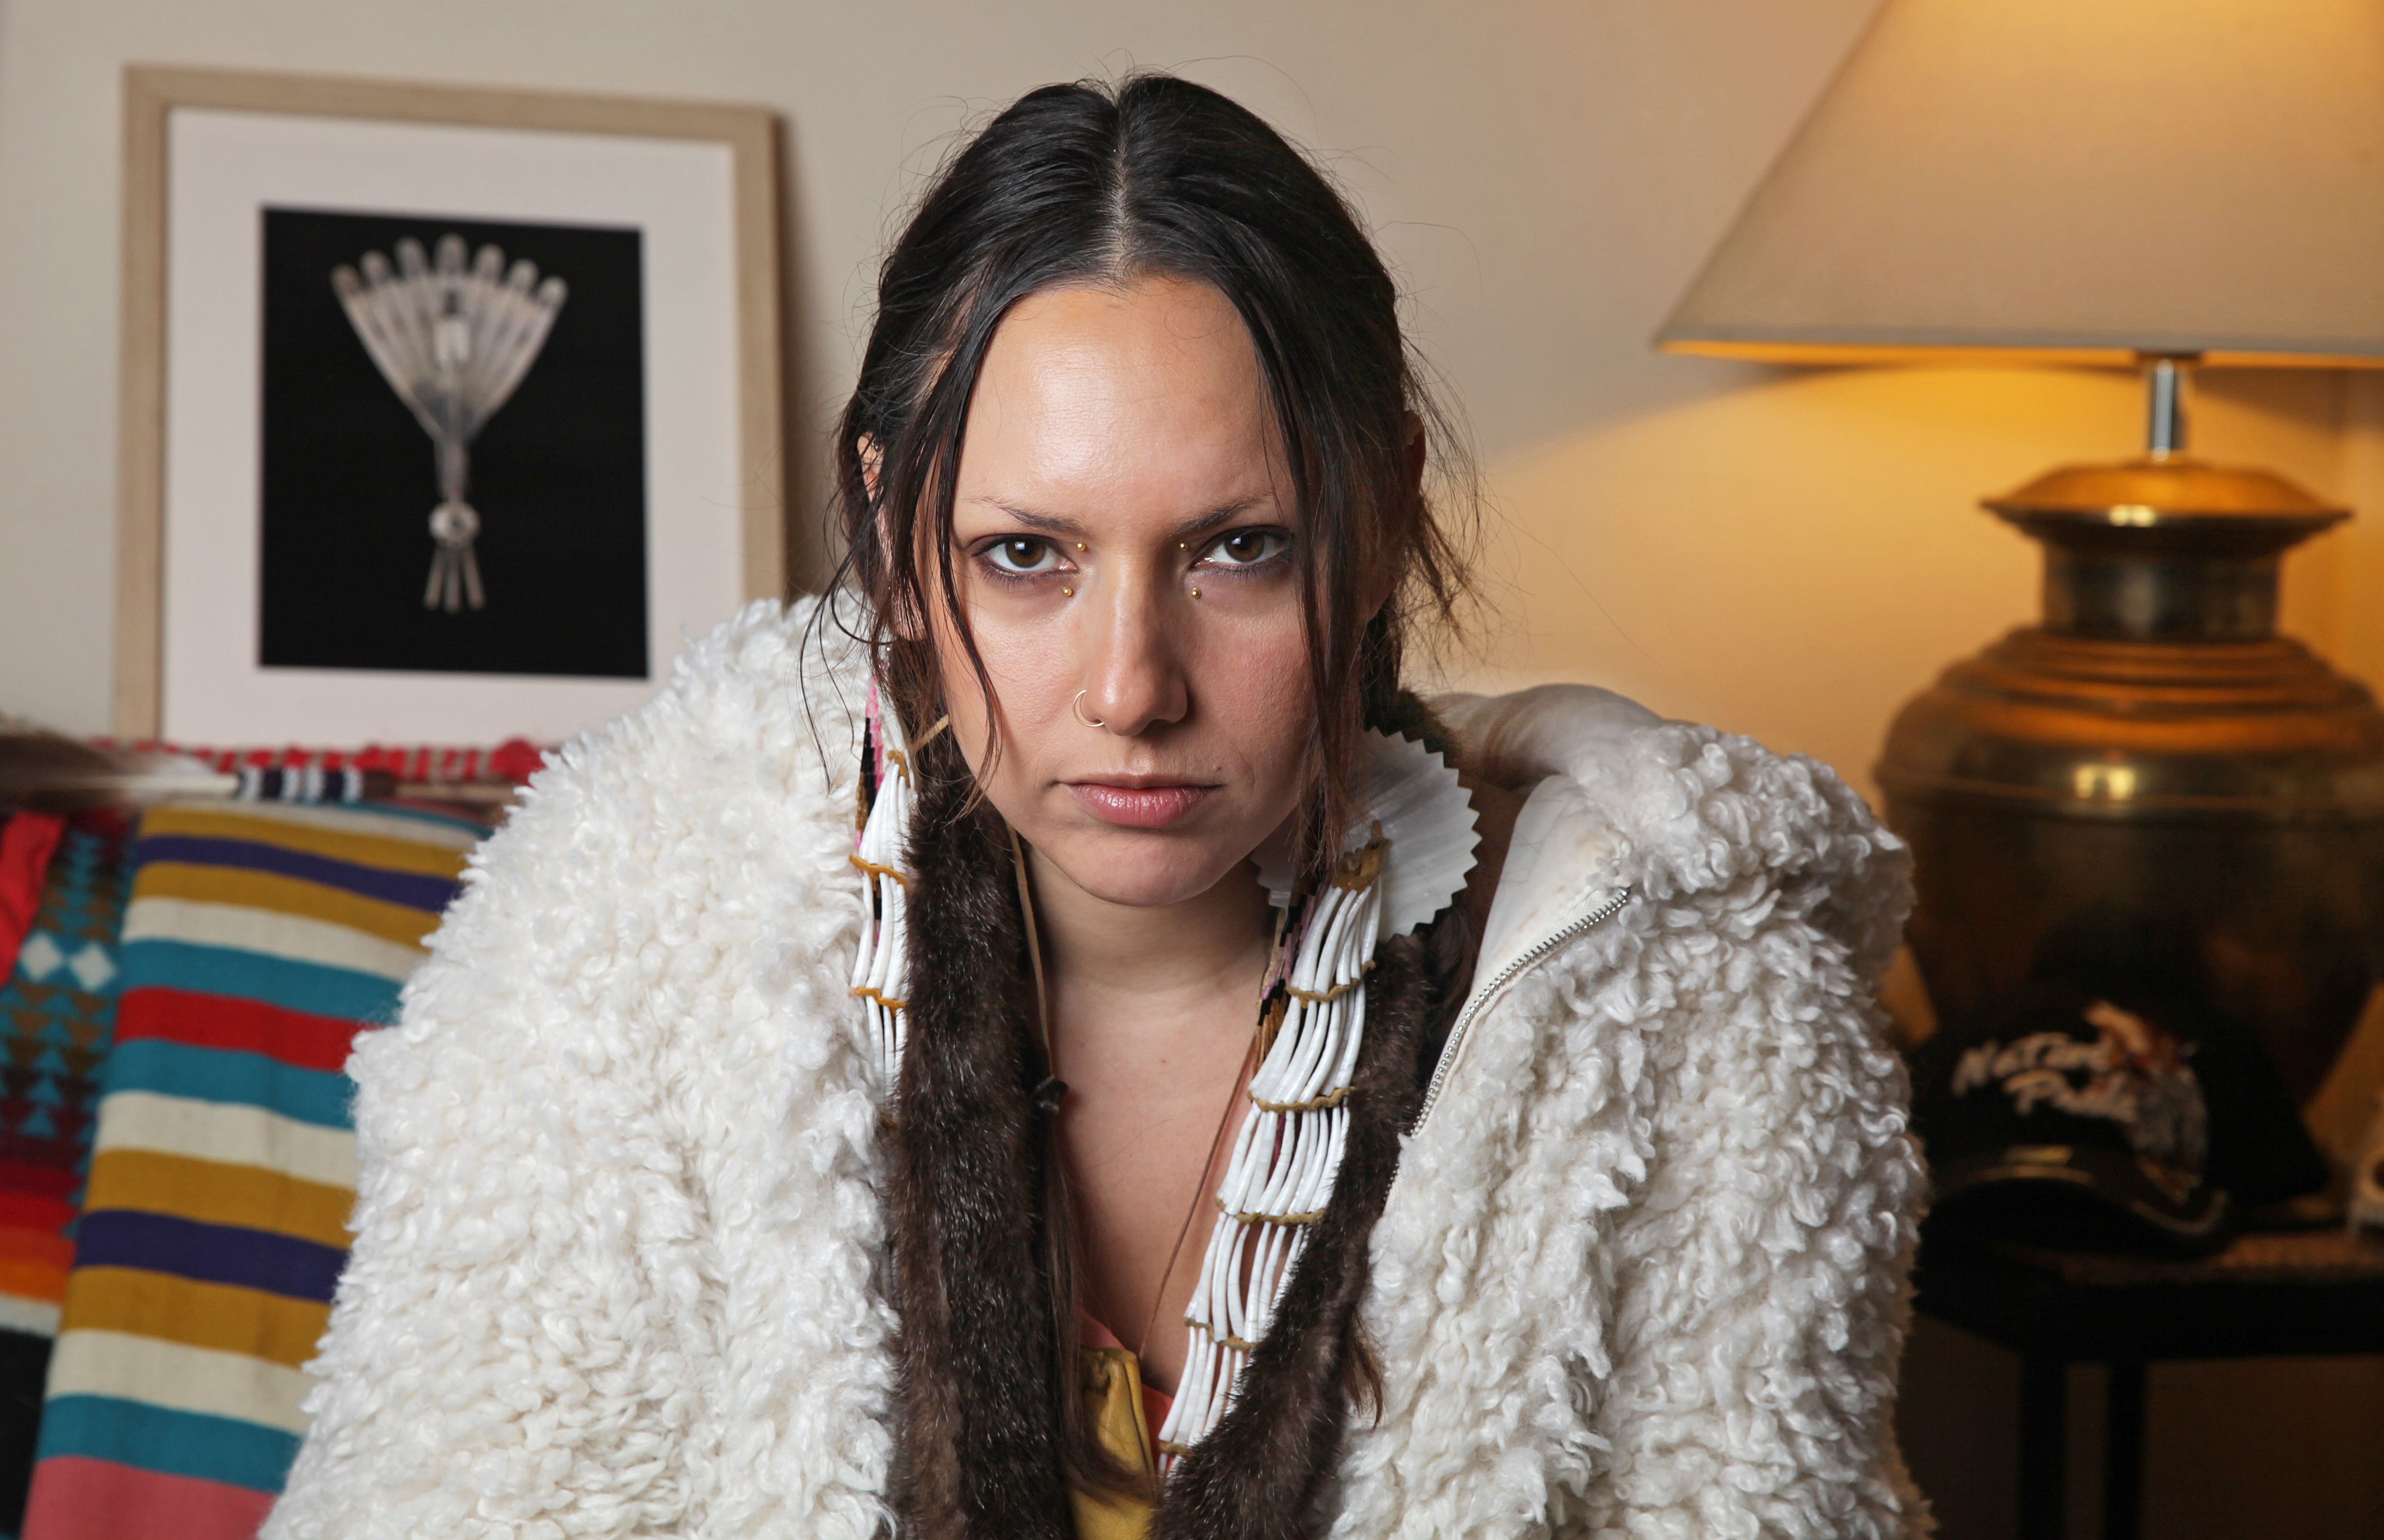 Kite, a young Oglála Lakȟóta woman, with facial piercings in a fake fur hoodie stares directly into the camera